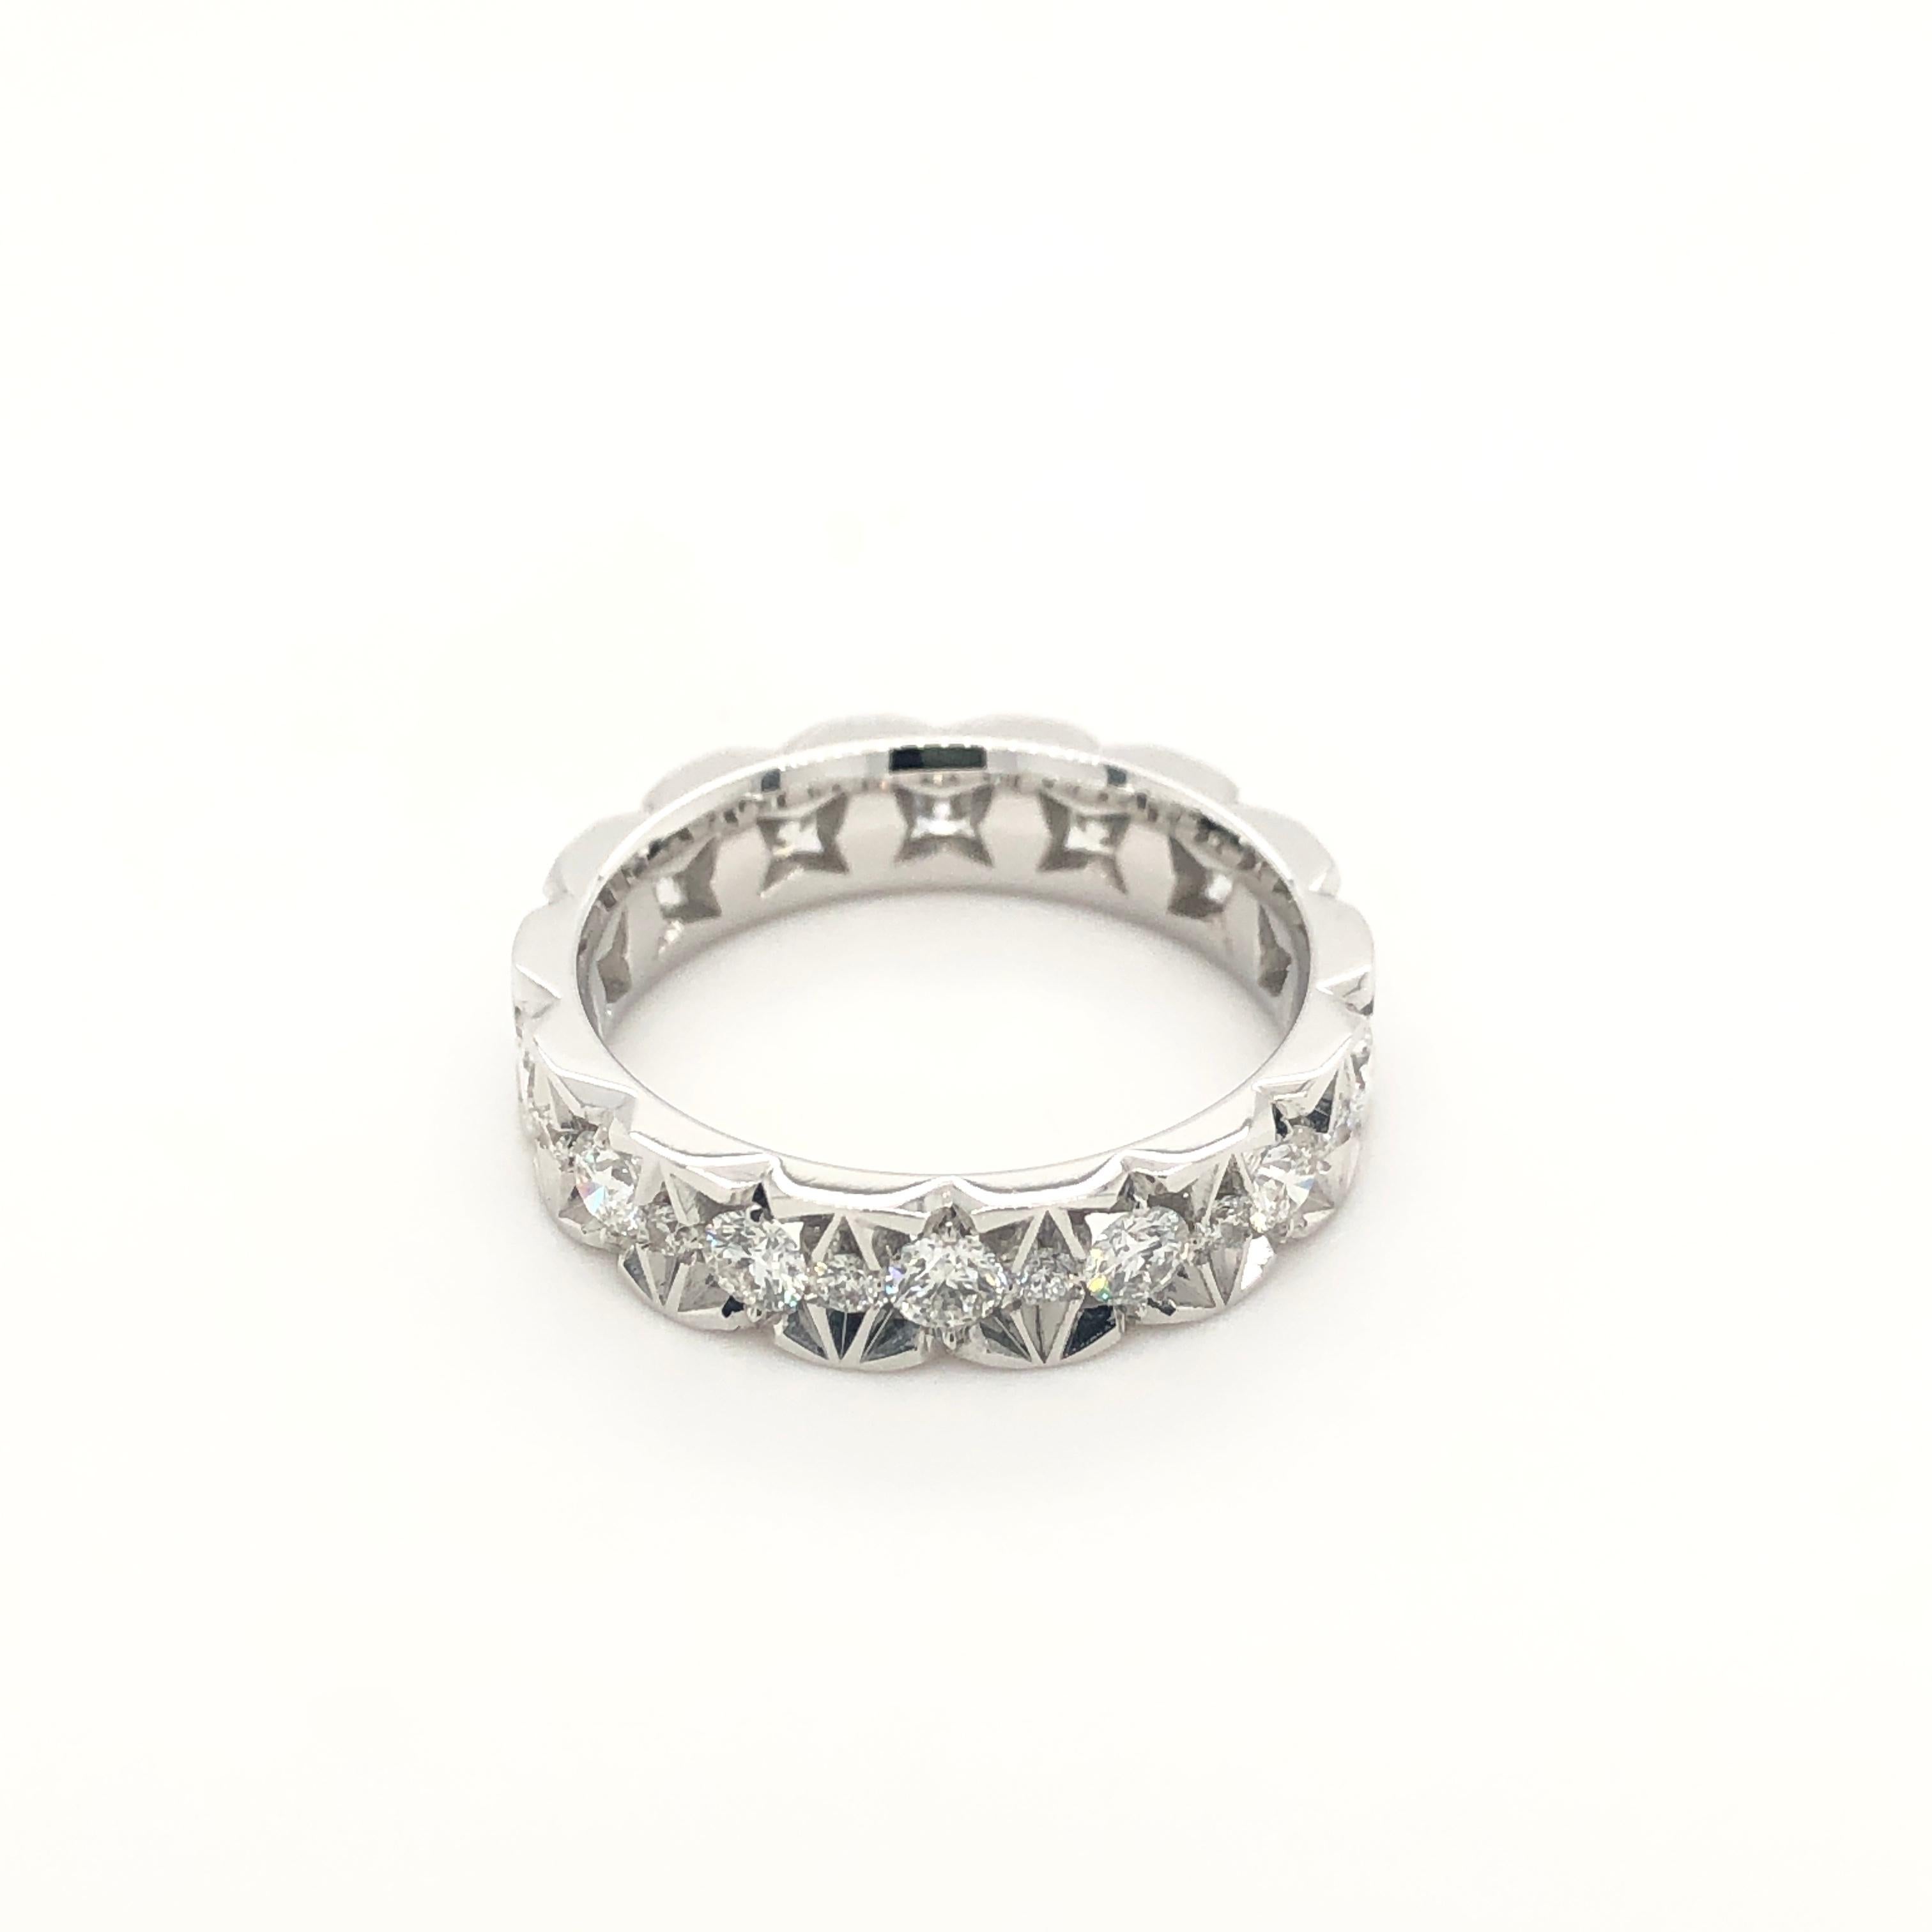 18 Karat White Gold Eternity Ring set with 1.371 Carat White Diamonds.
White Diamonds are brilliant cut.

This ring is available in white gold AND rose gold (see in other listing)
Also beautiful worn together as one.
Or the perfect wedding ring if